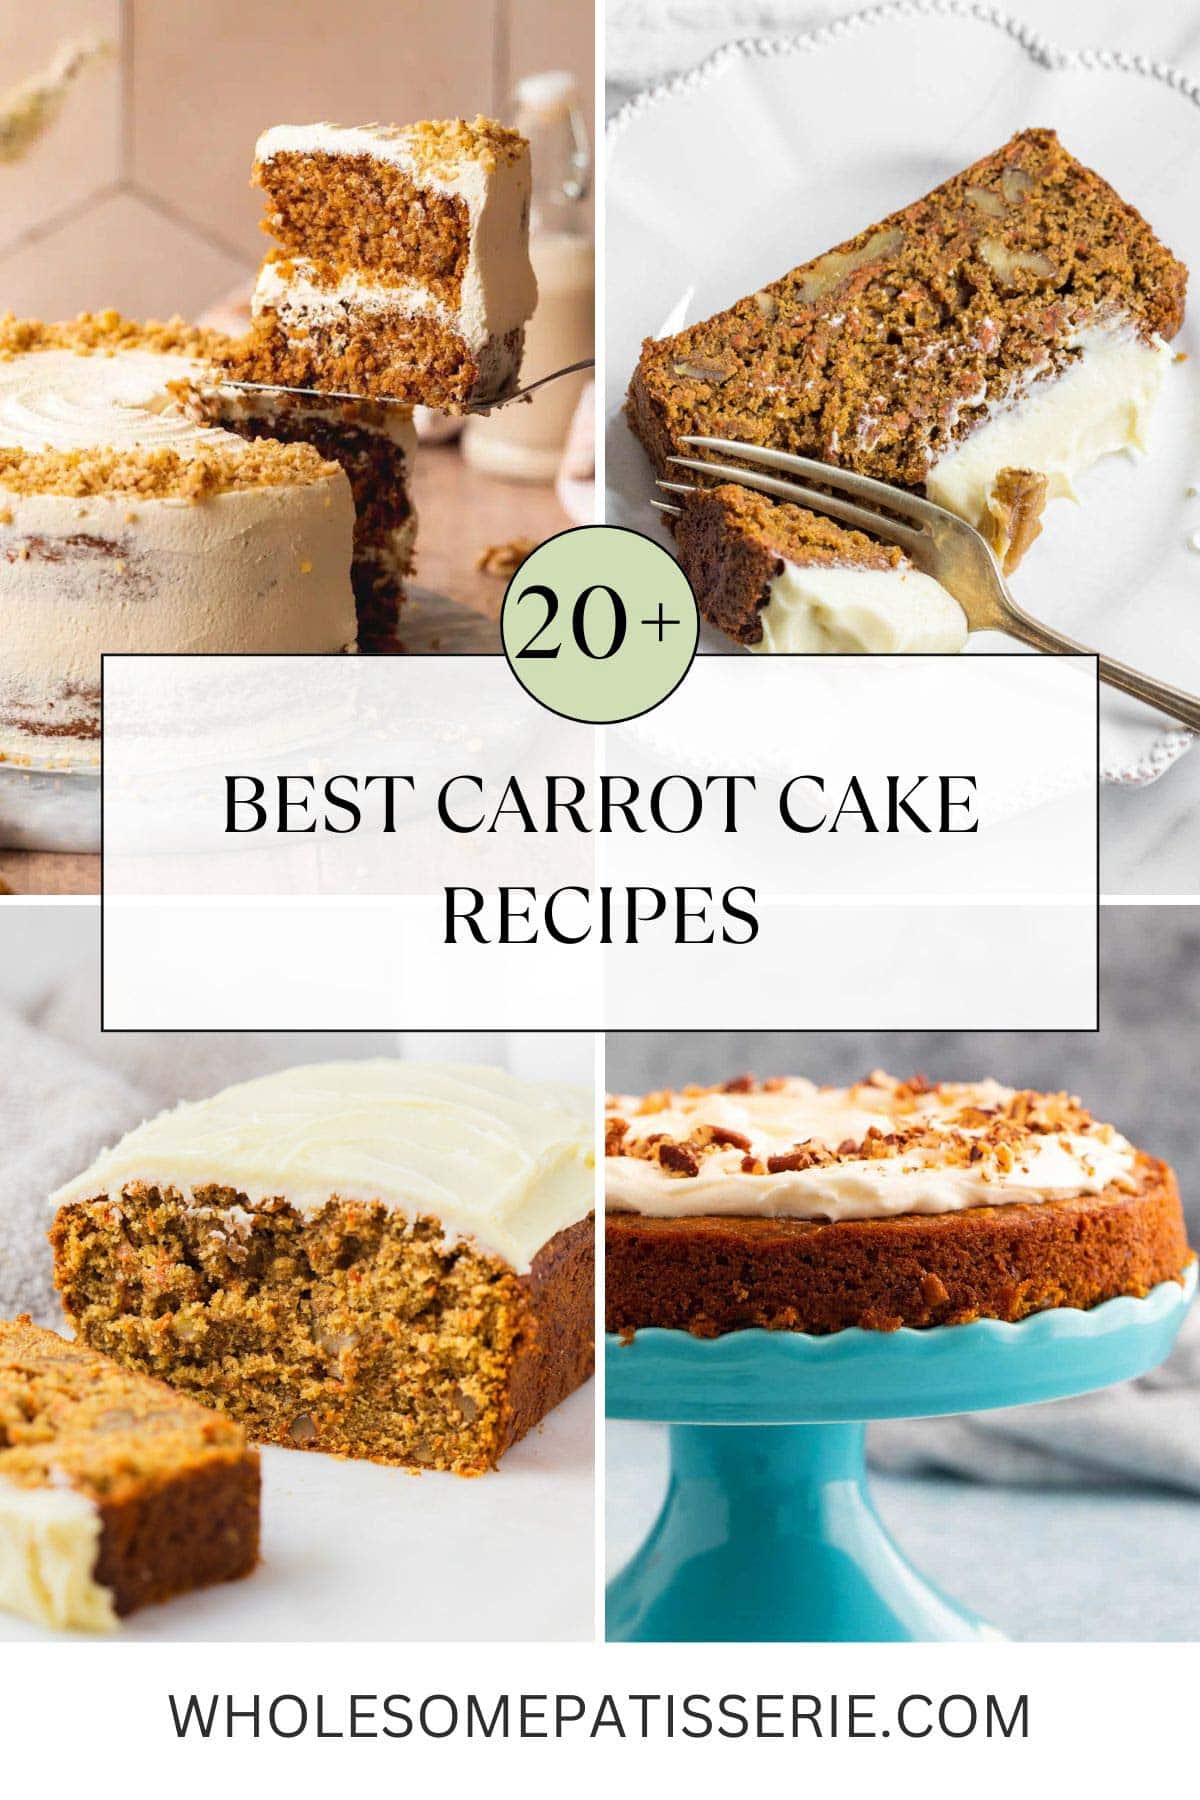 Four carrot cakes on a graphic for best carrot cake post.